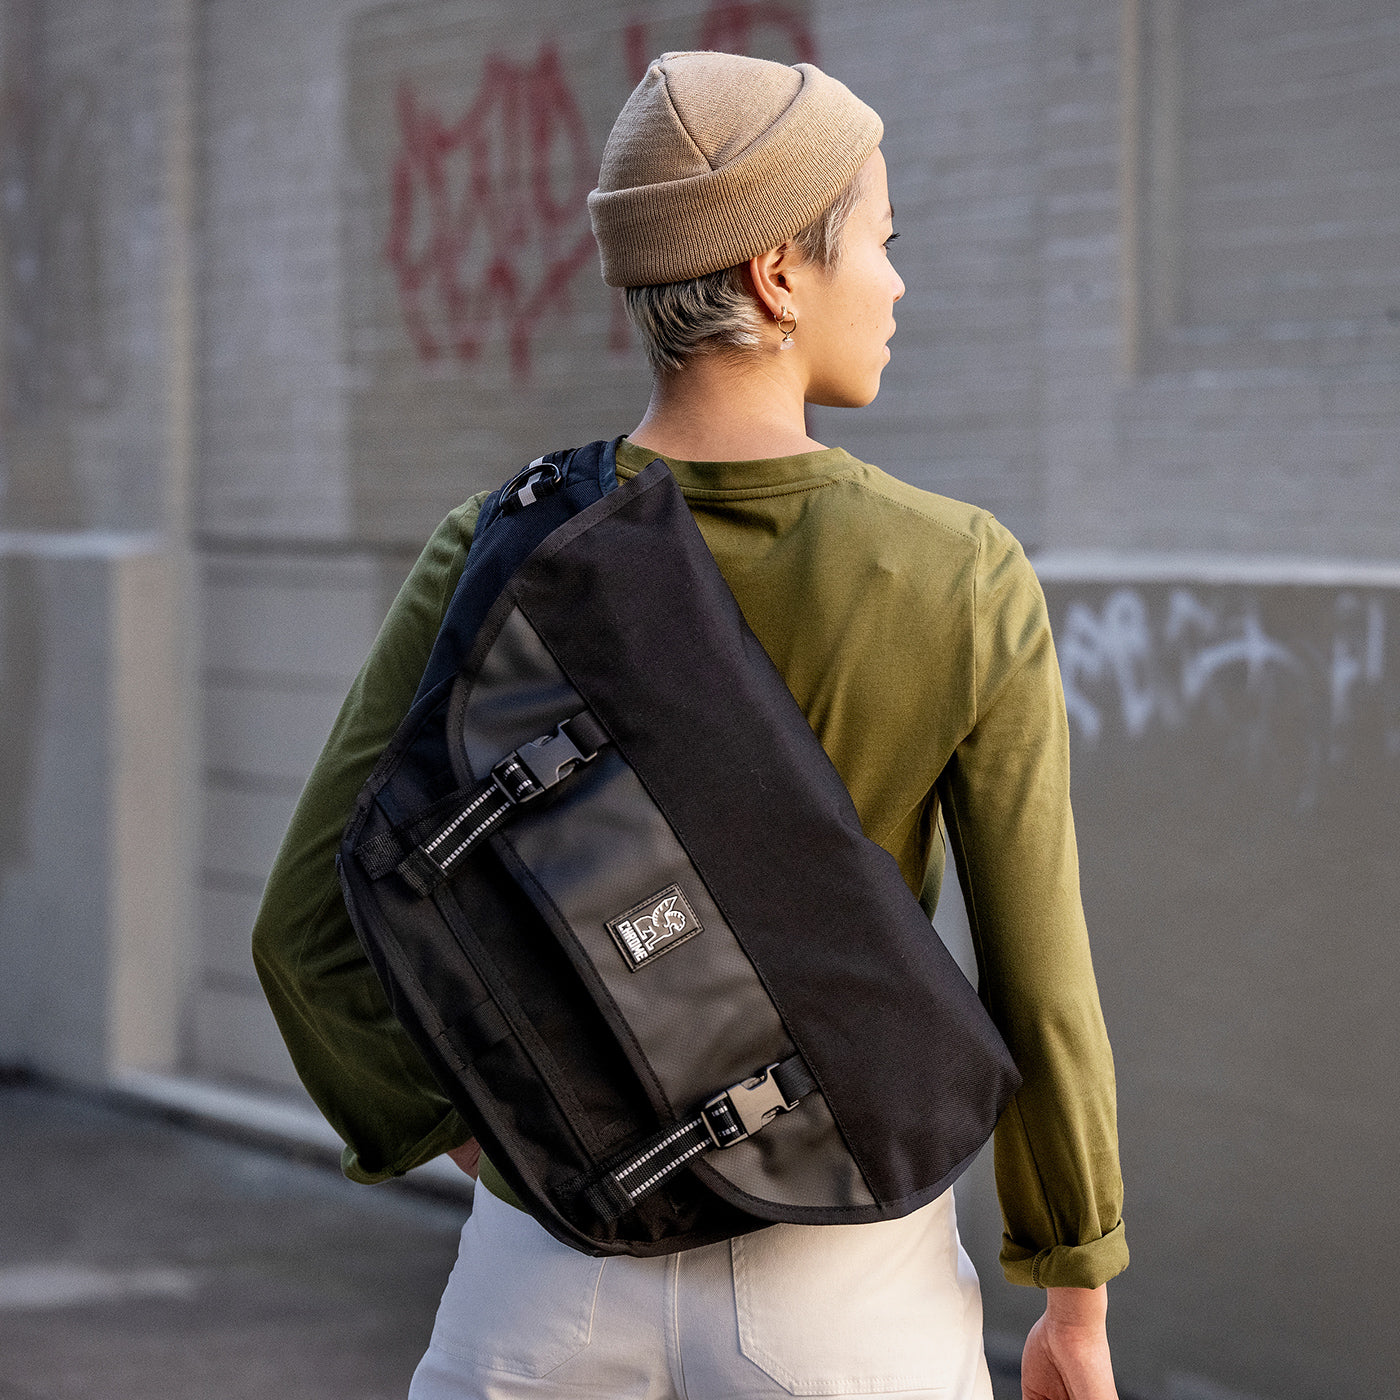 How to Choose the Right Messenger Bag